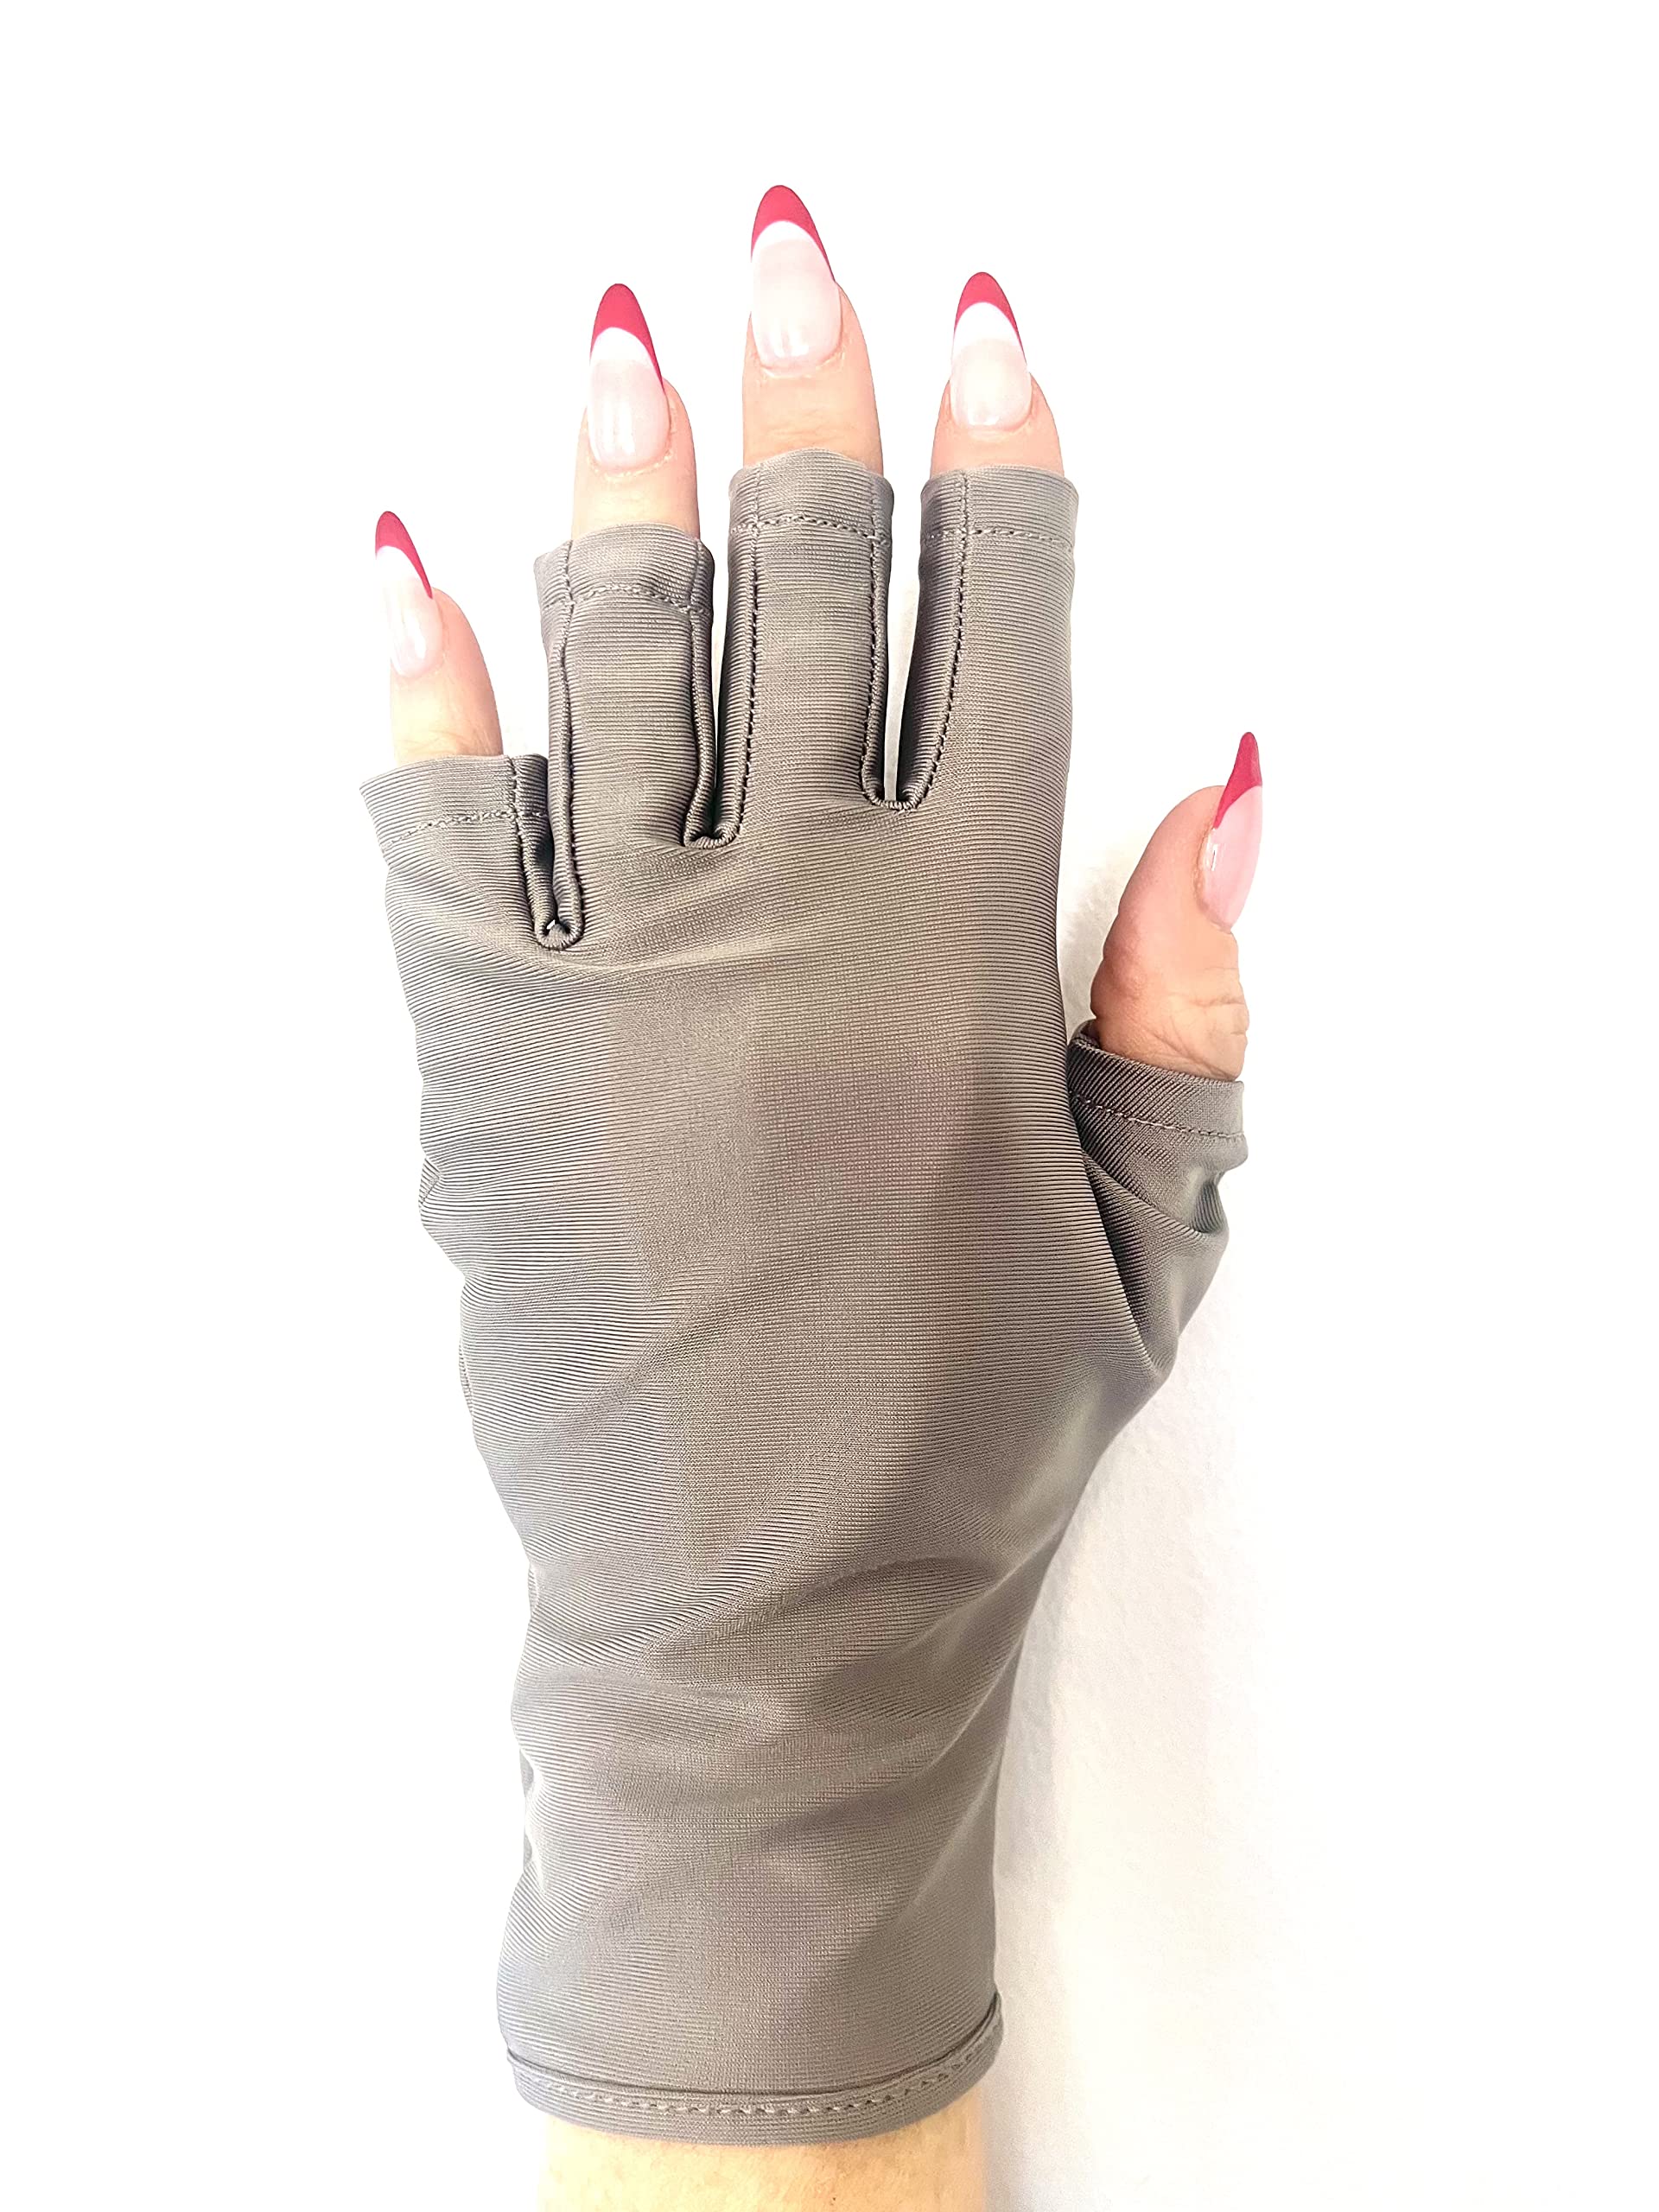 ManiGlovz - The ORIGINAL UPF 50+ UV Light Protective Nail Gloves | Gel  Manicure Gloves and Anti UV Fingerless Gloves for Women | Can be Used as  Sun